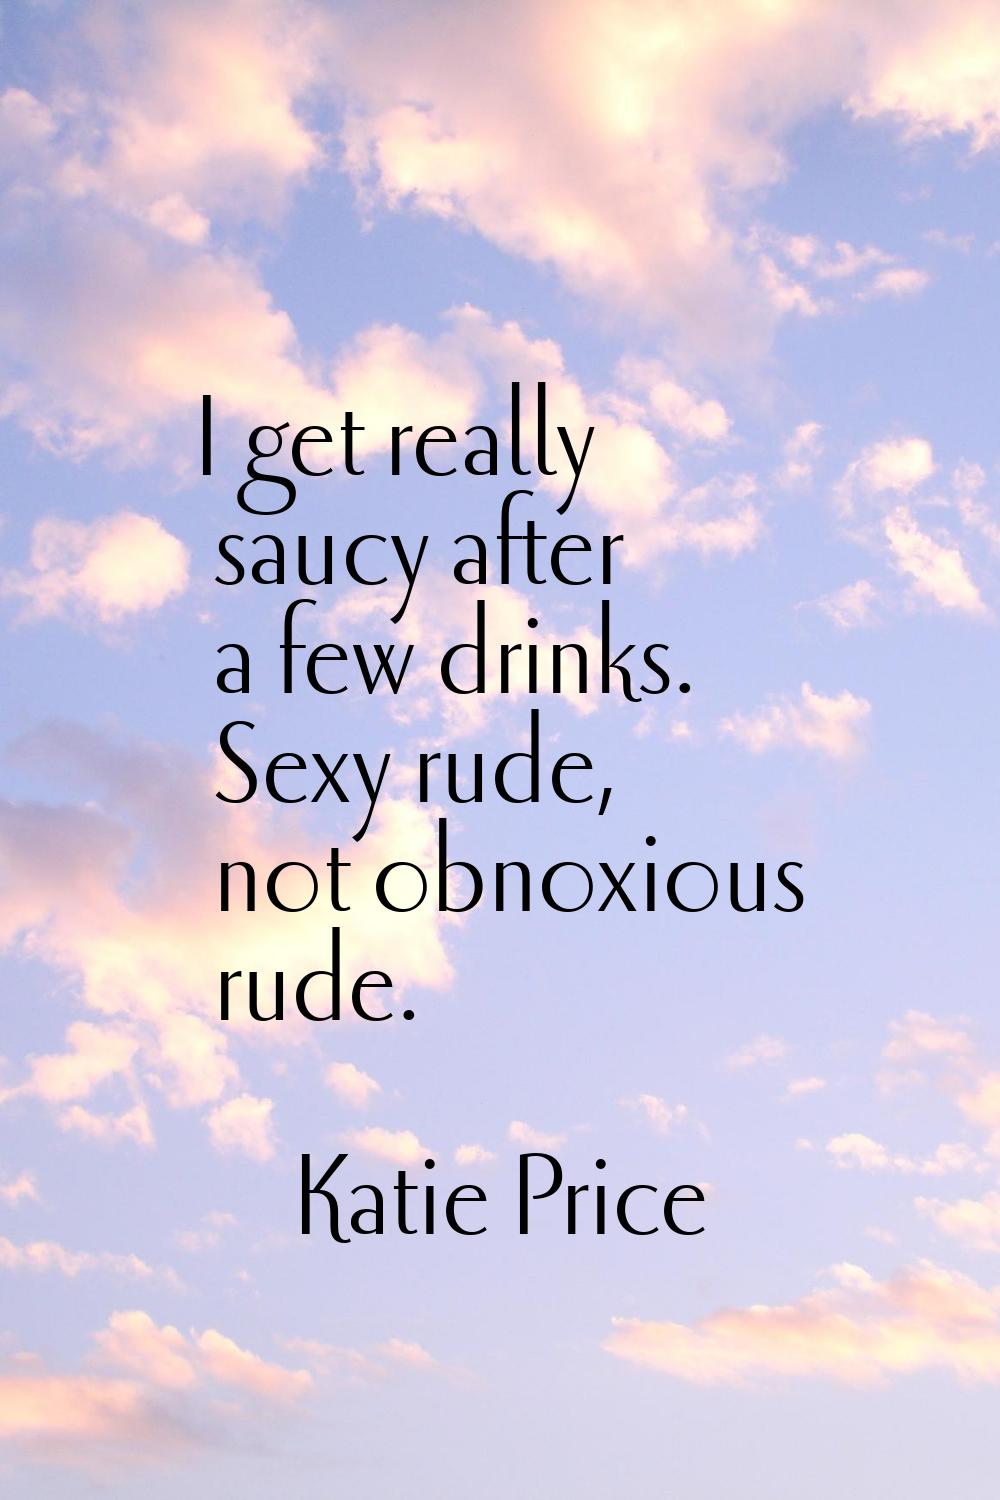 I get really saucy after a few drinks. Sexy rude, not obnoxious rude.